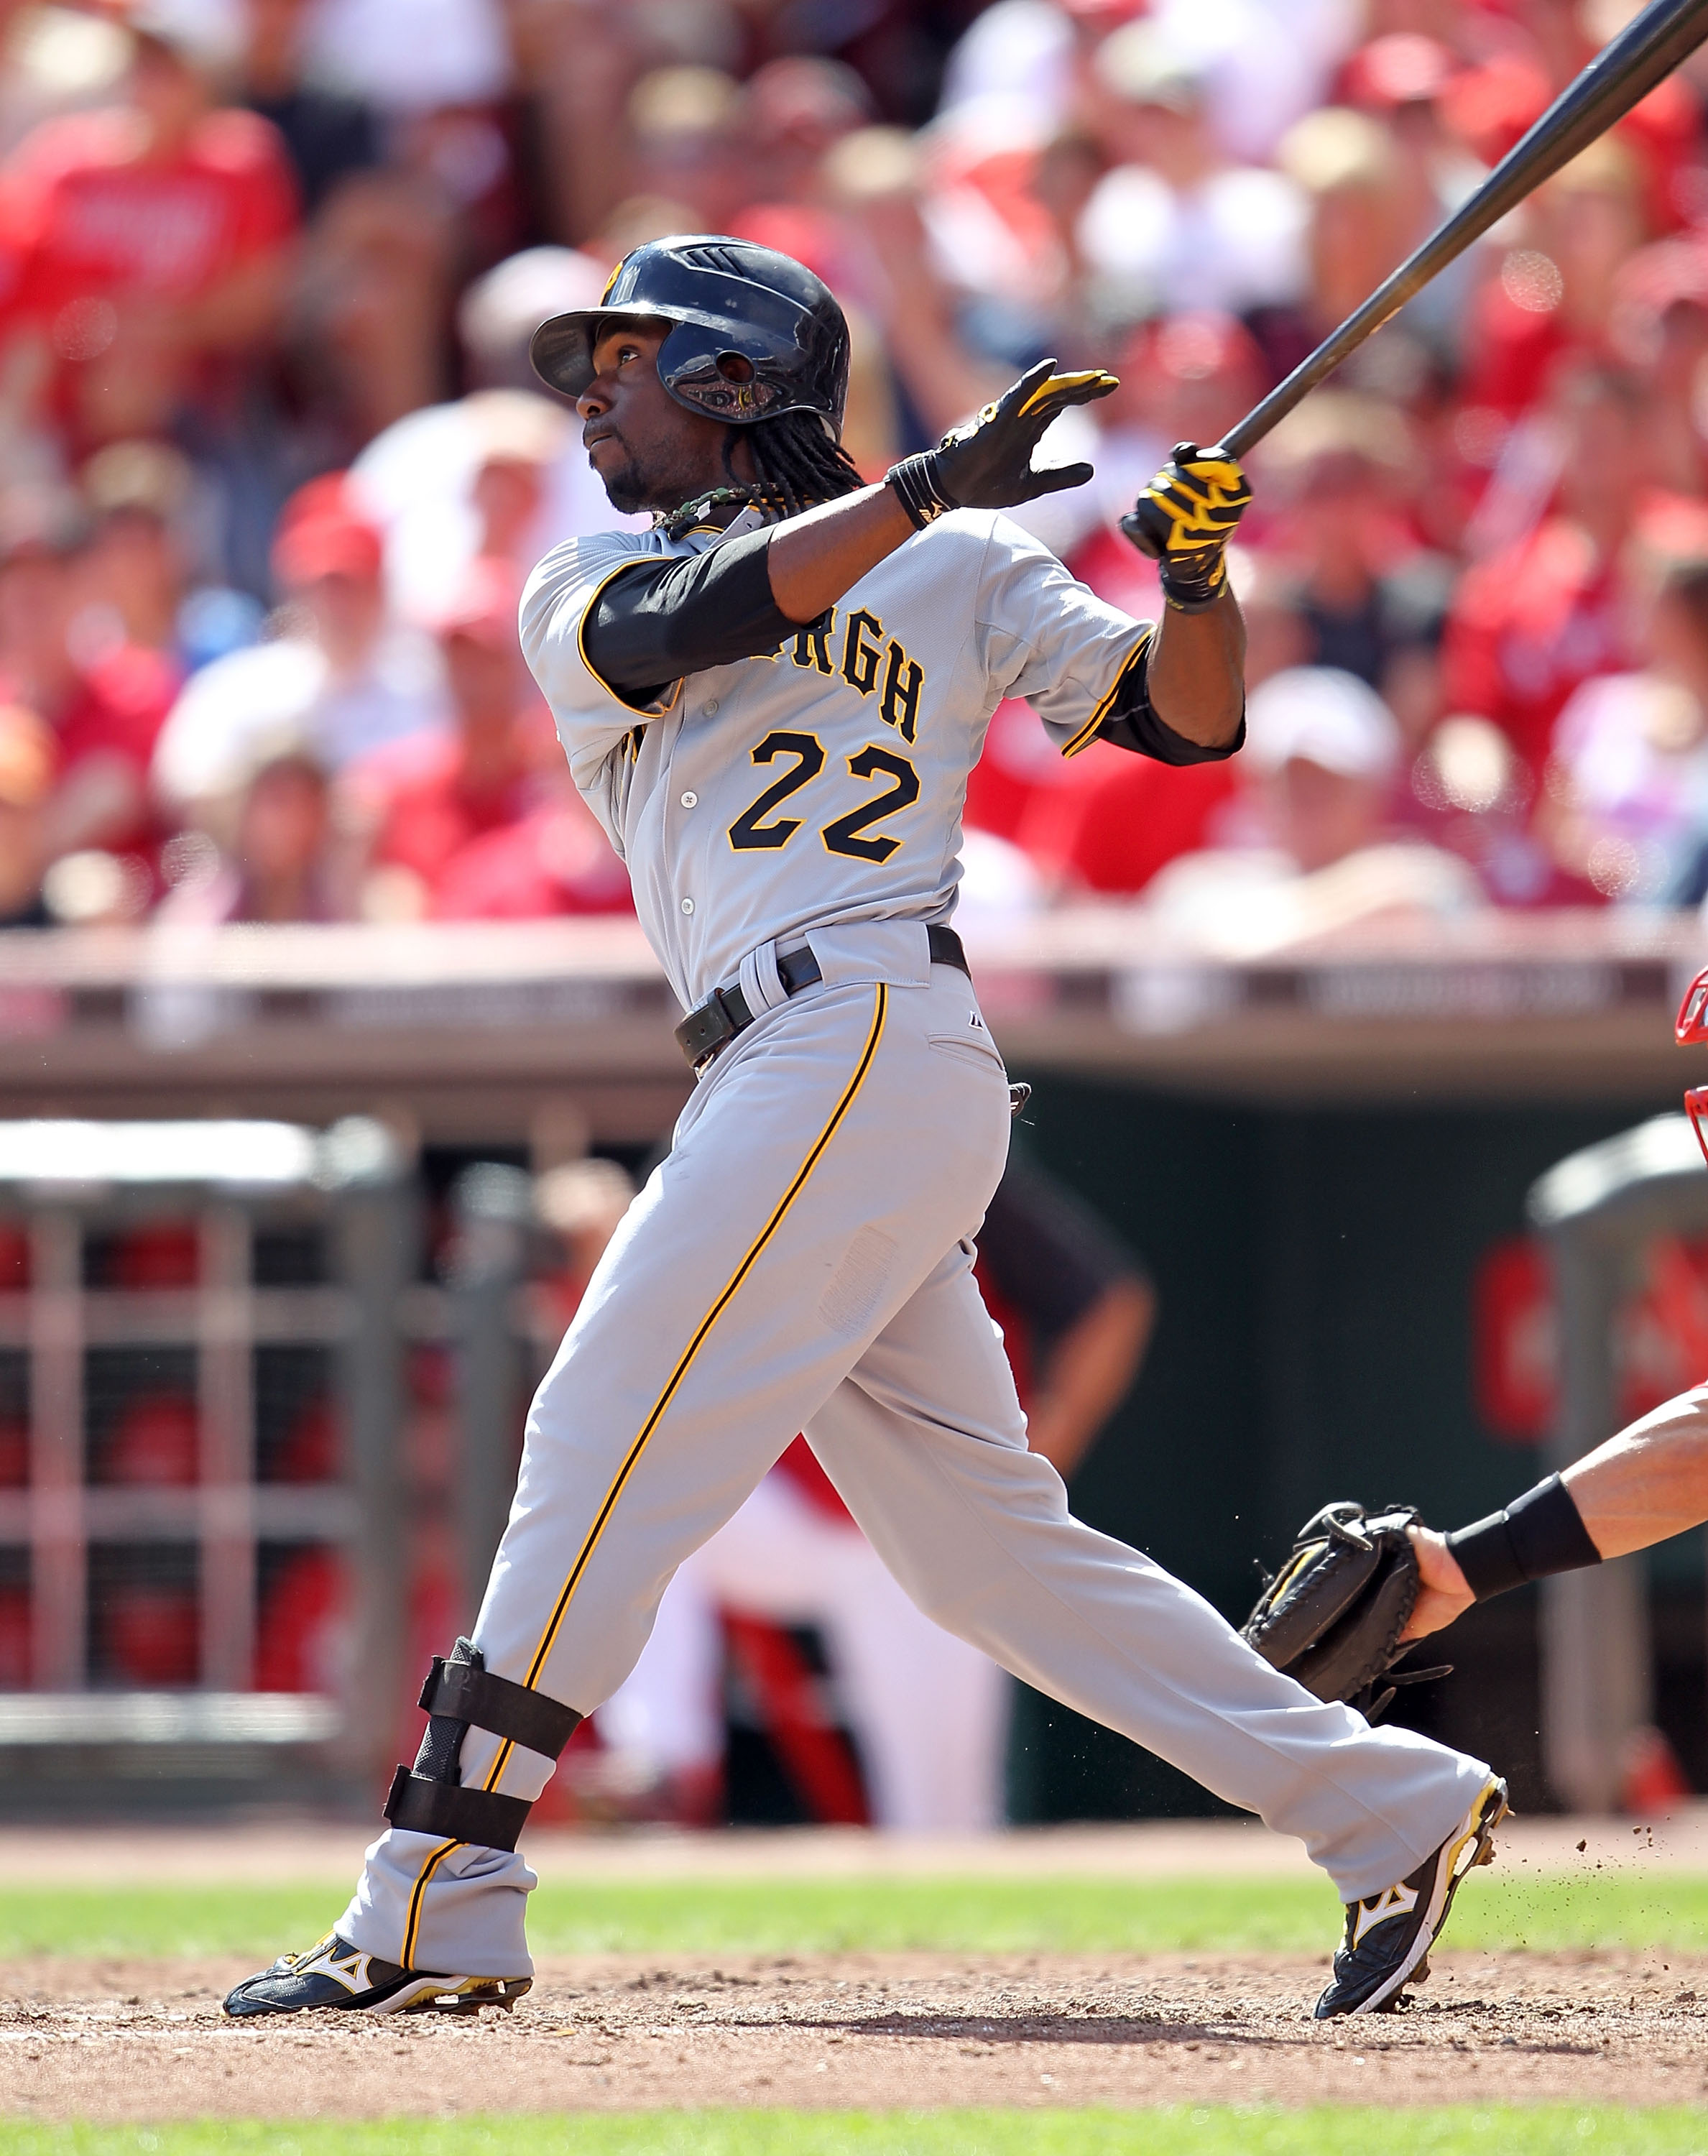 CINCINNATI - SEPTEMBER 12: Andrew McCutchen #22 of the Pittsburgh Pirates swings at a pitch during the game against the Cincinnati Reds at Great American Ballpark on September 12, 2010 in Cincinnati, Ohio. He hit a three run double in the ninth inning to 